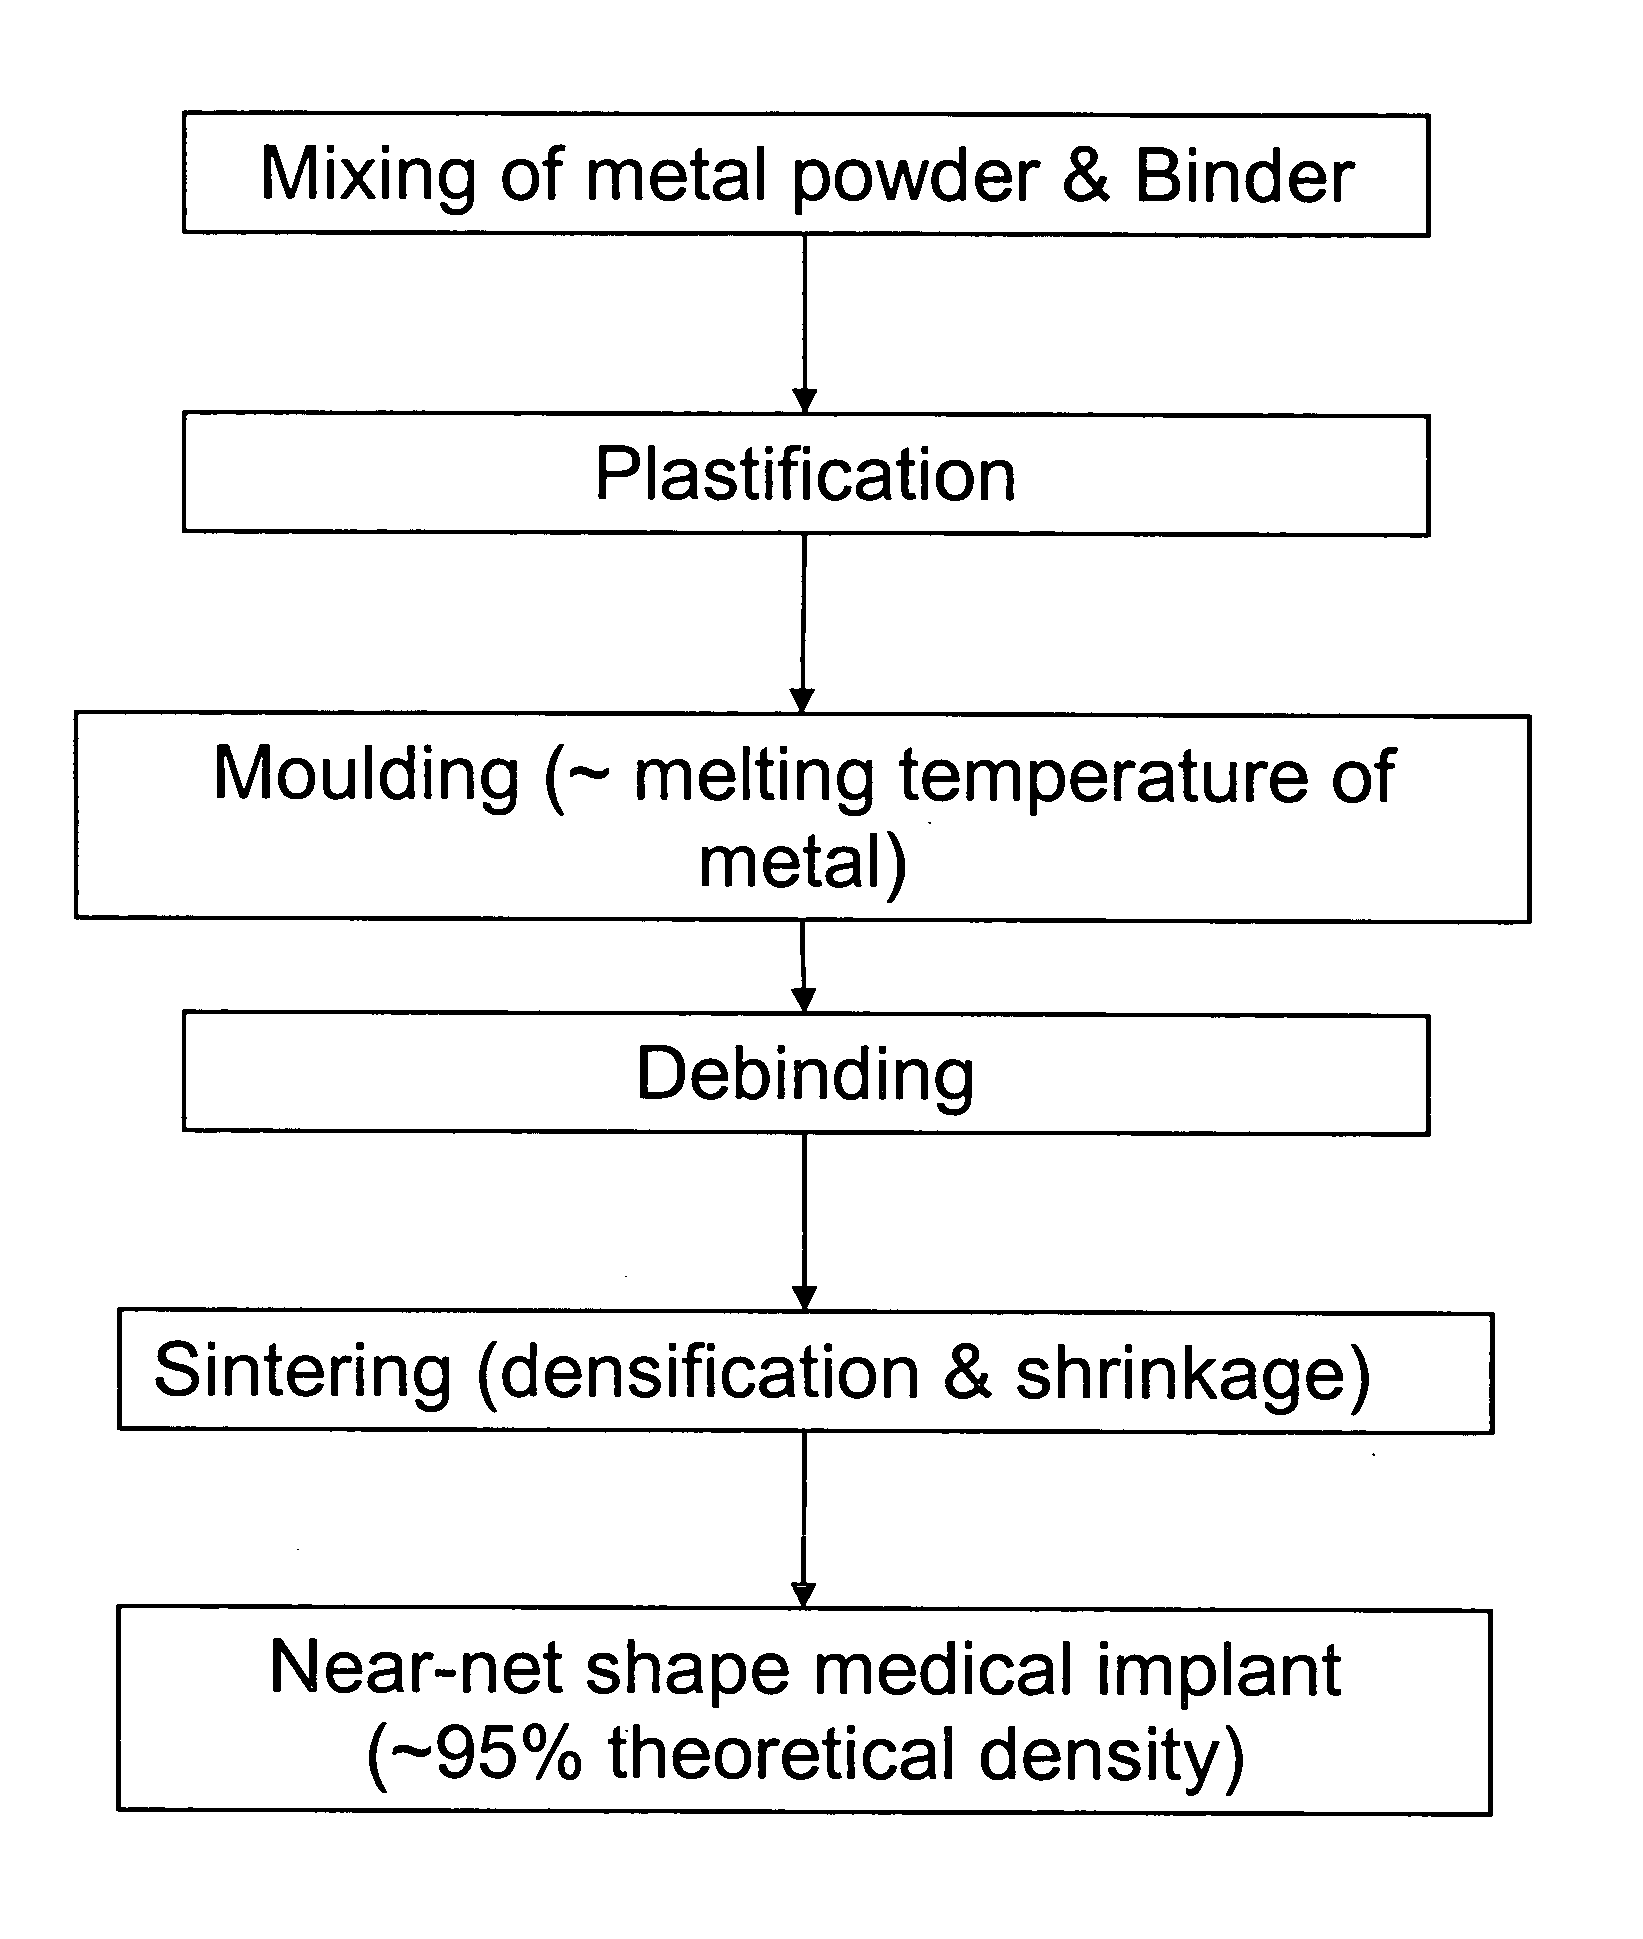 Metal injection moulding for the production of medical implants